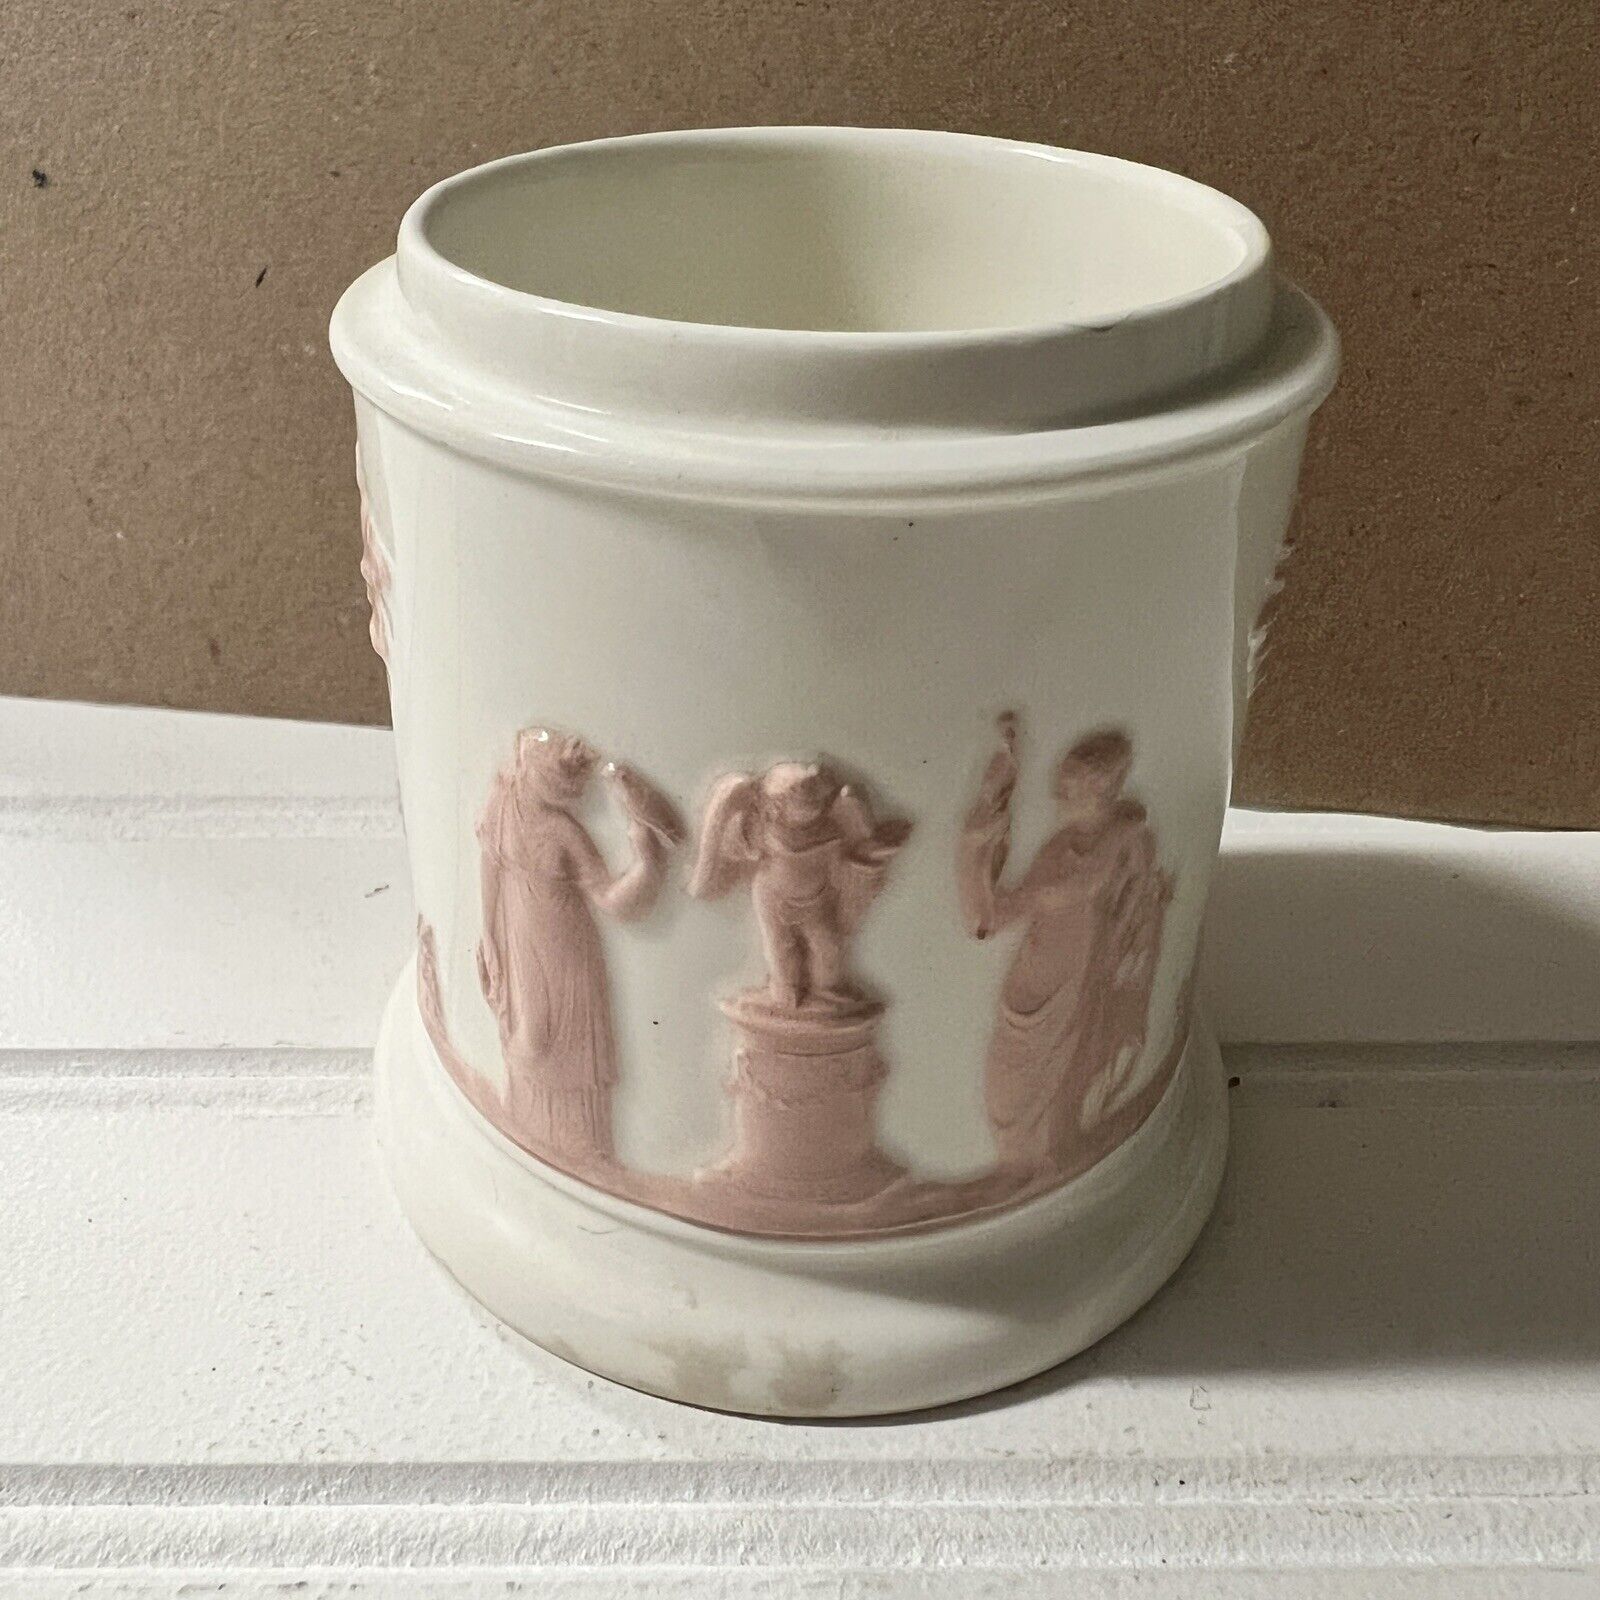 wedgwood pink on cream angels jar without lid 3.5 inches tall Holder Cup